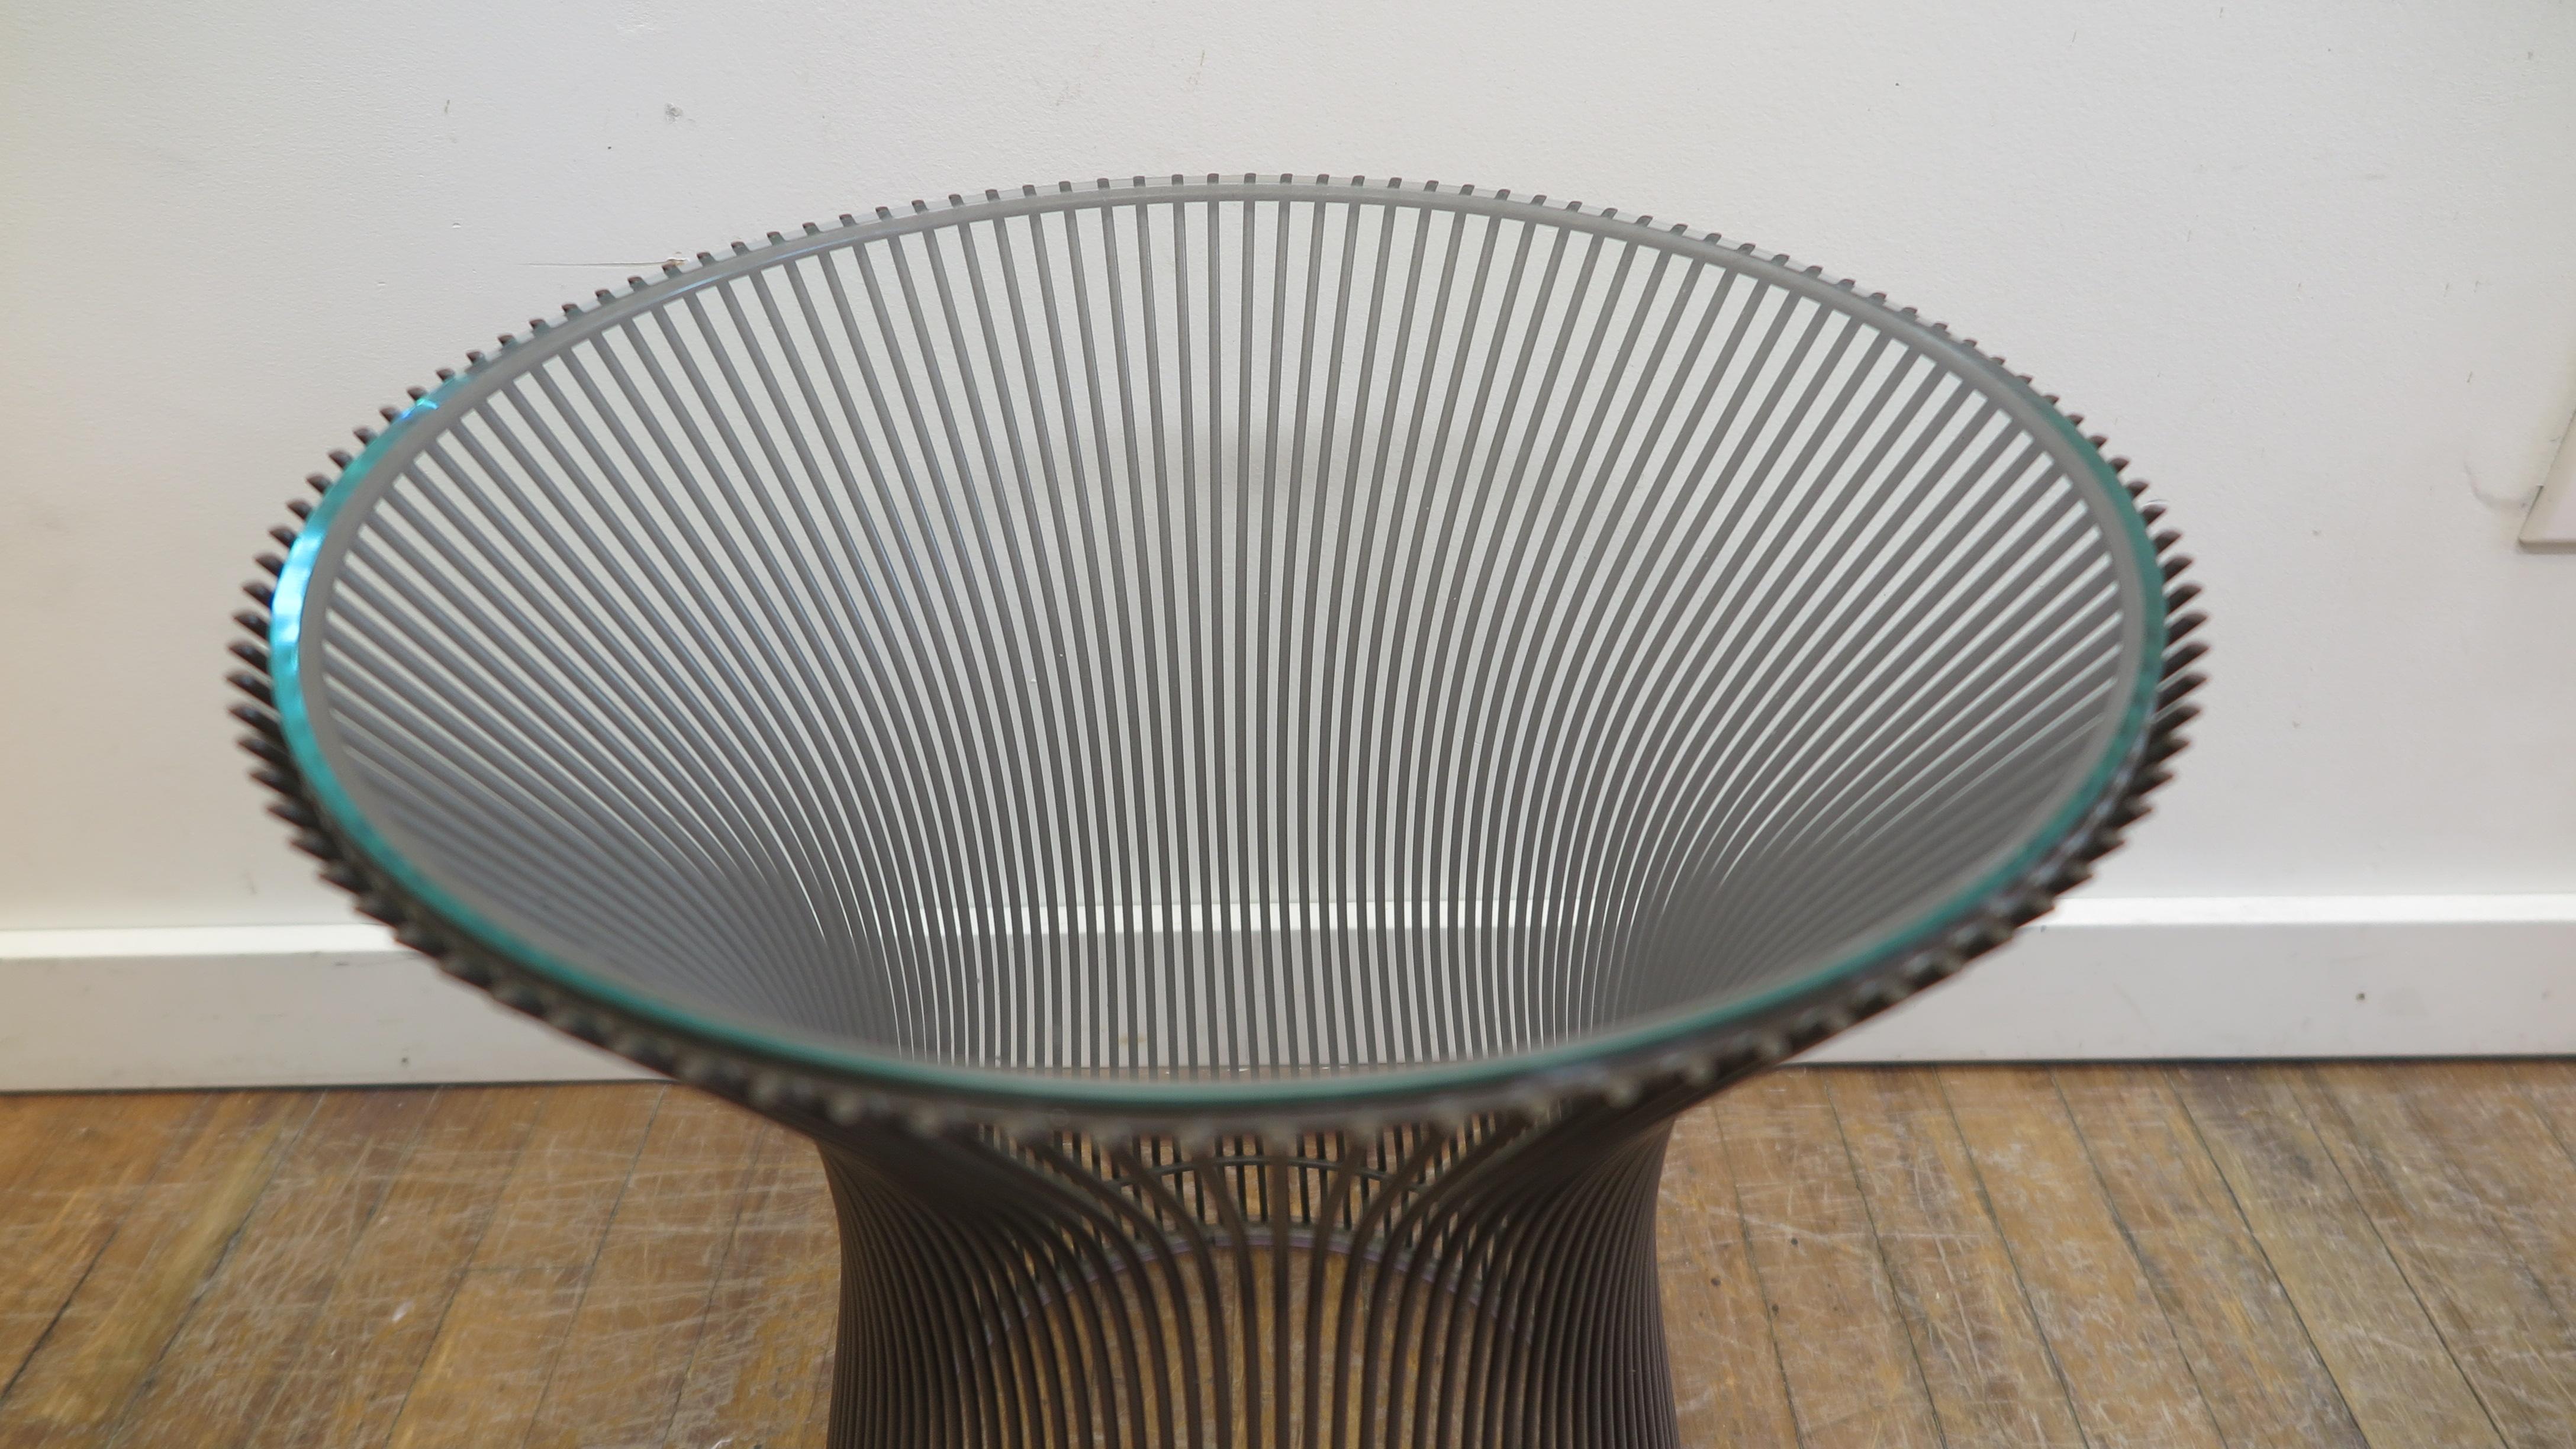 Warren Platner side table bronze. Iconic Warren Platner side table in bronze original period manufacture 1966-1972. In very good original condition.
The listing includes 1 table.
